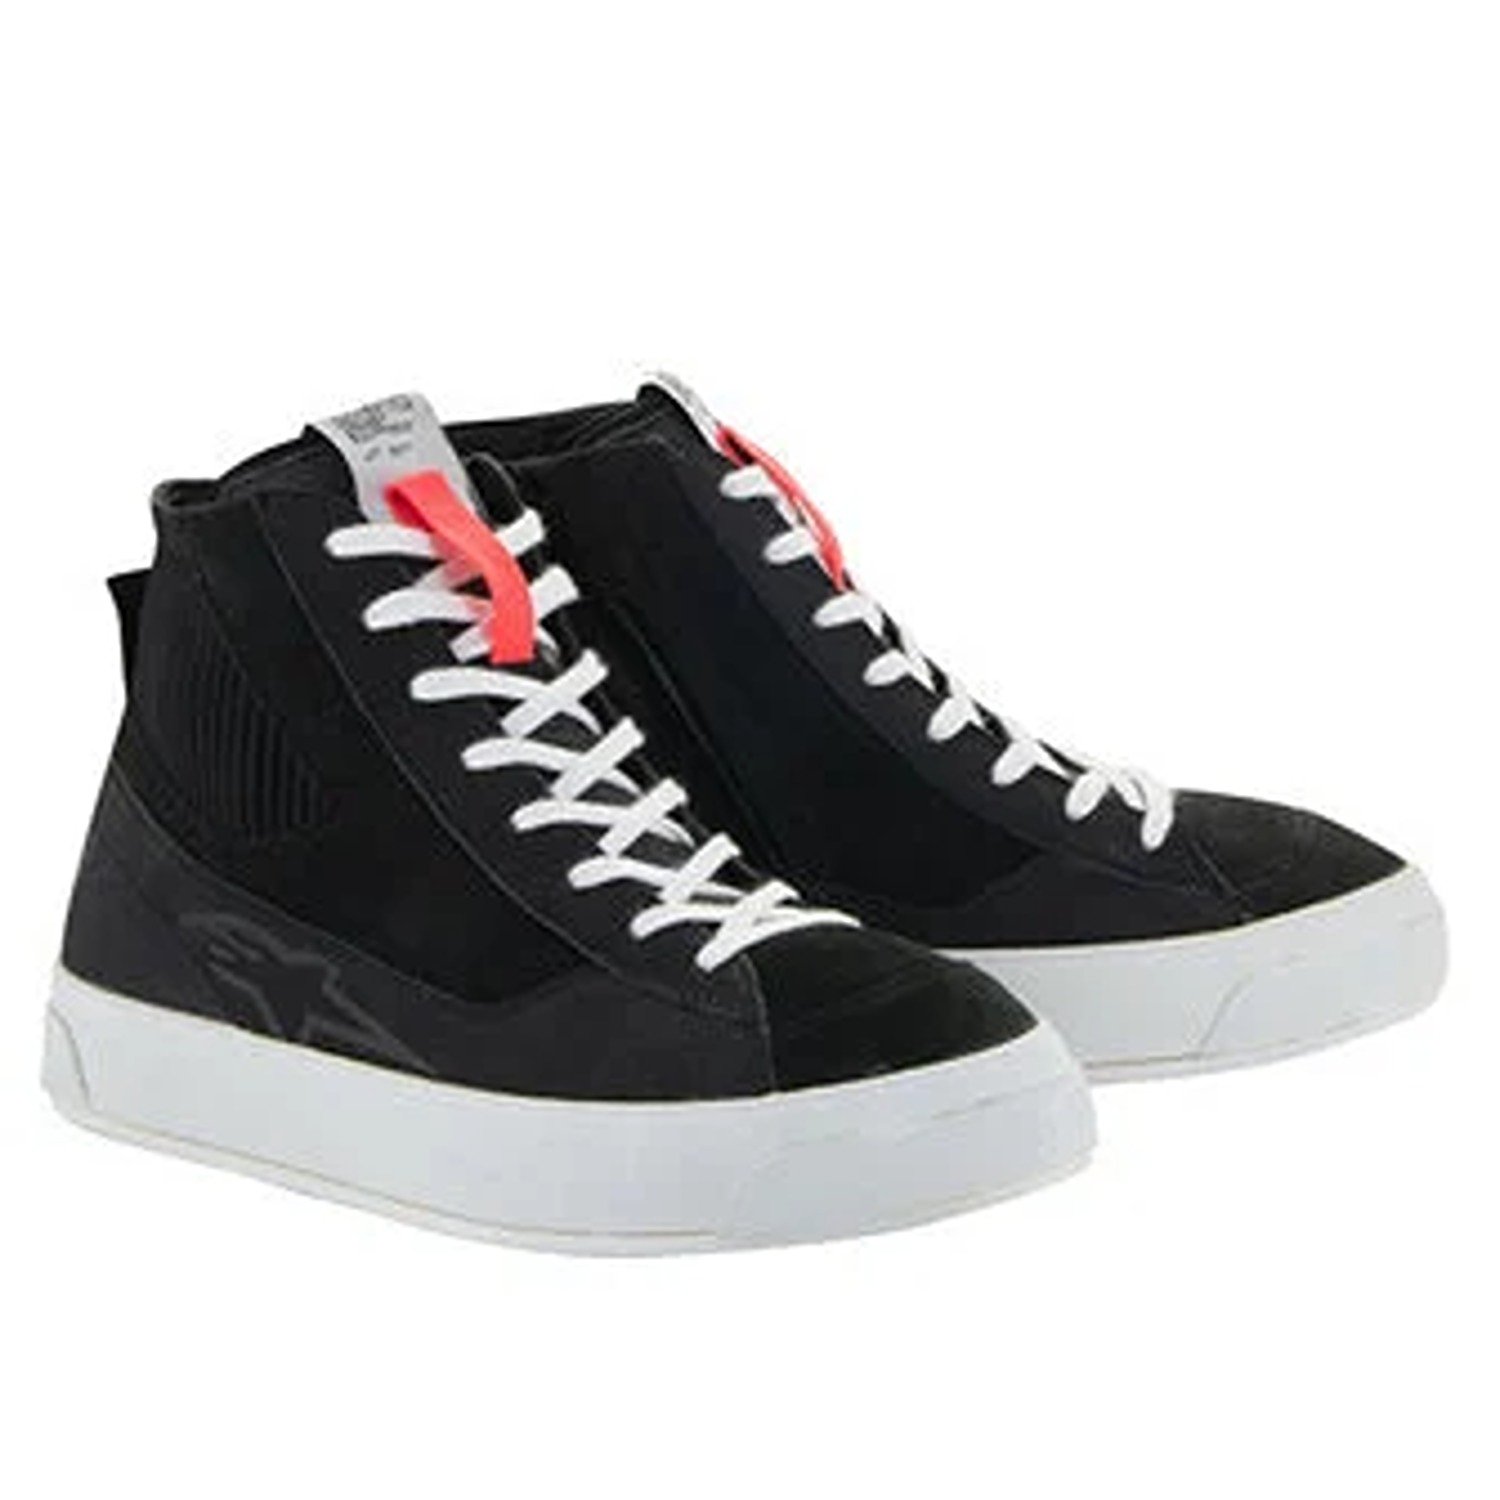 Image of EU Alpinestars Stated Shoes Black Taille US 12